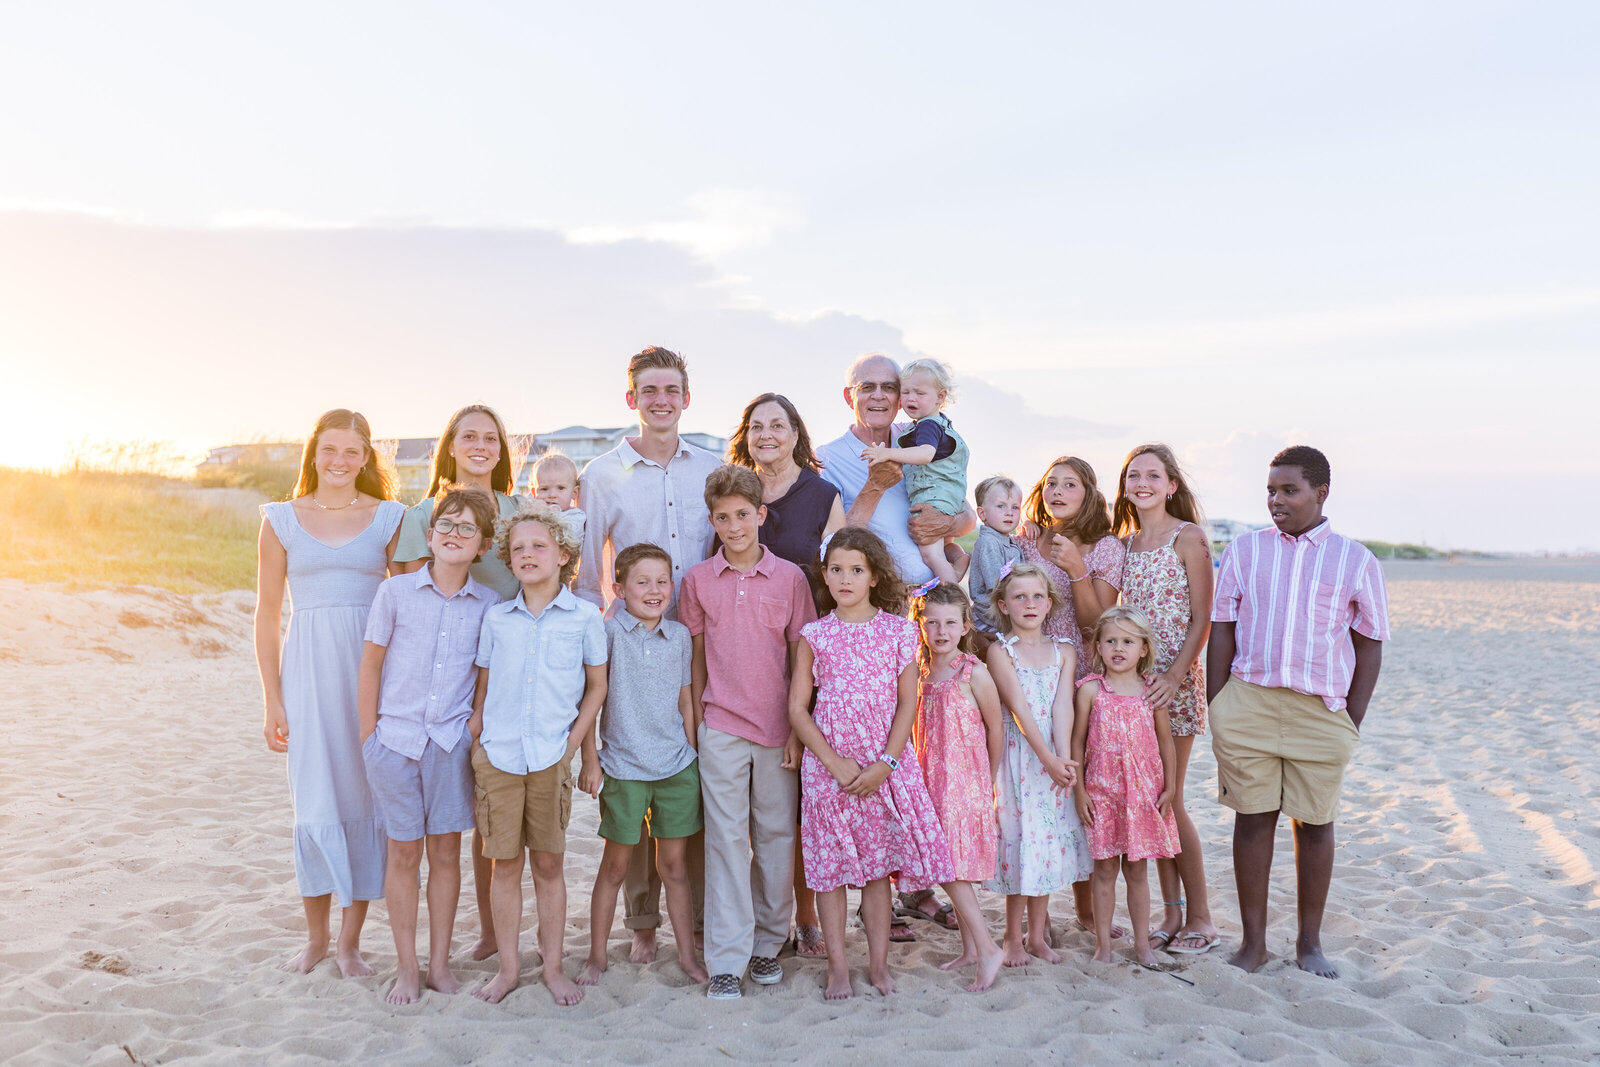 Hawaii Family Photos by Alison bell